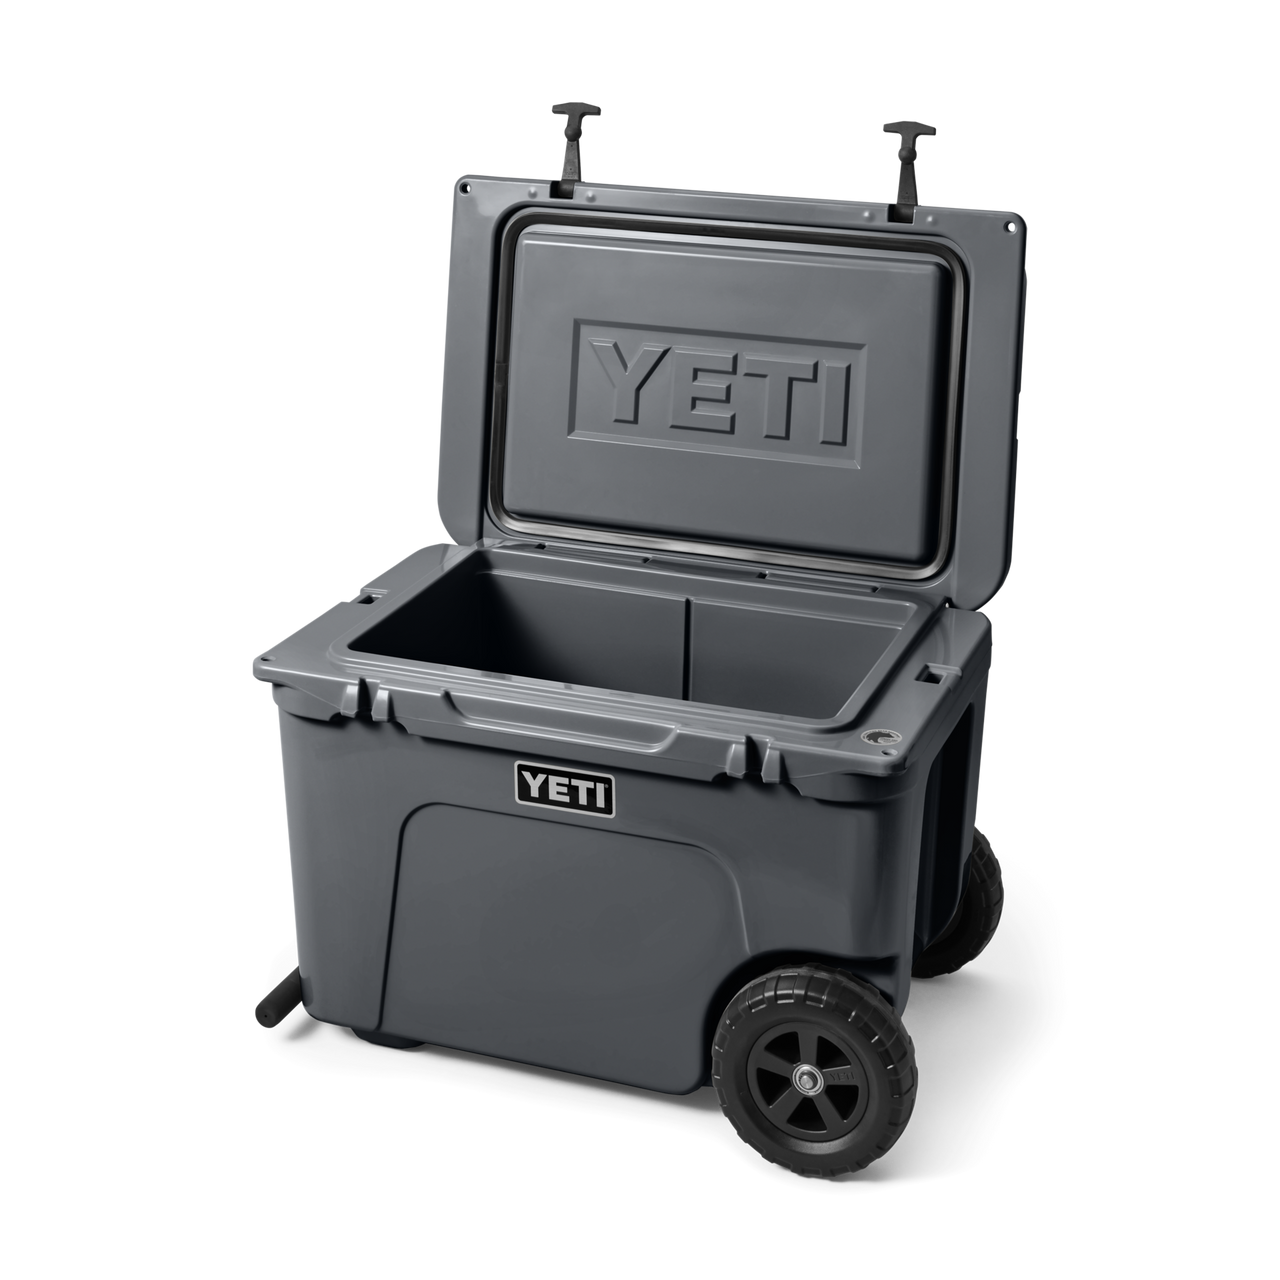 Tundra Haul wheel chassis bent : r/YetiCoolers